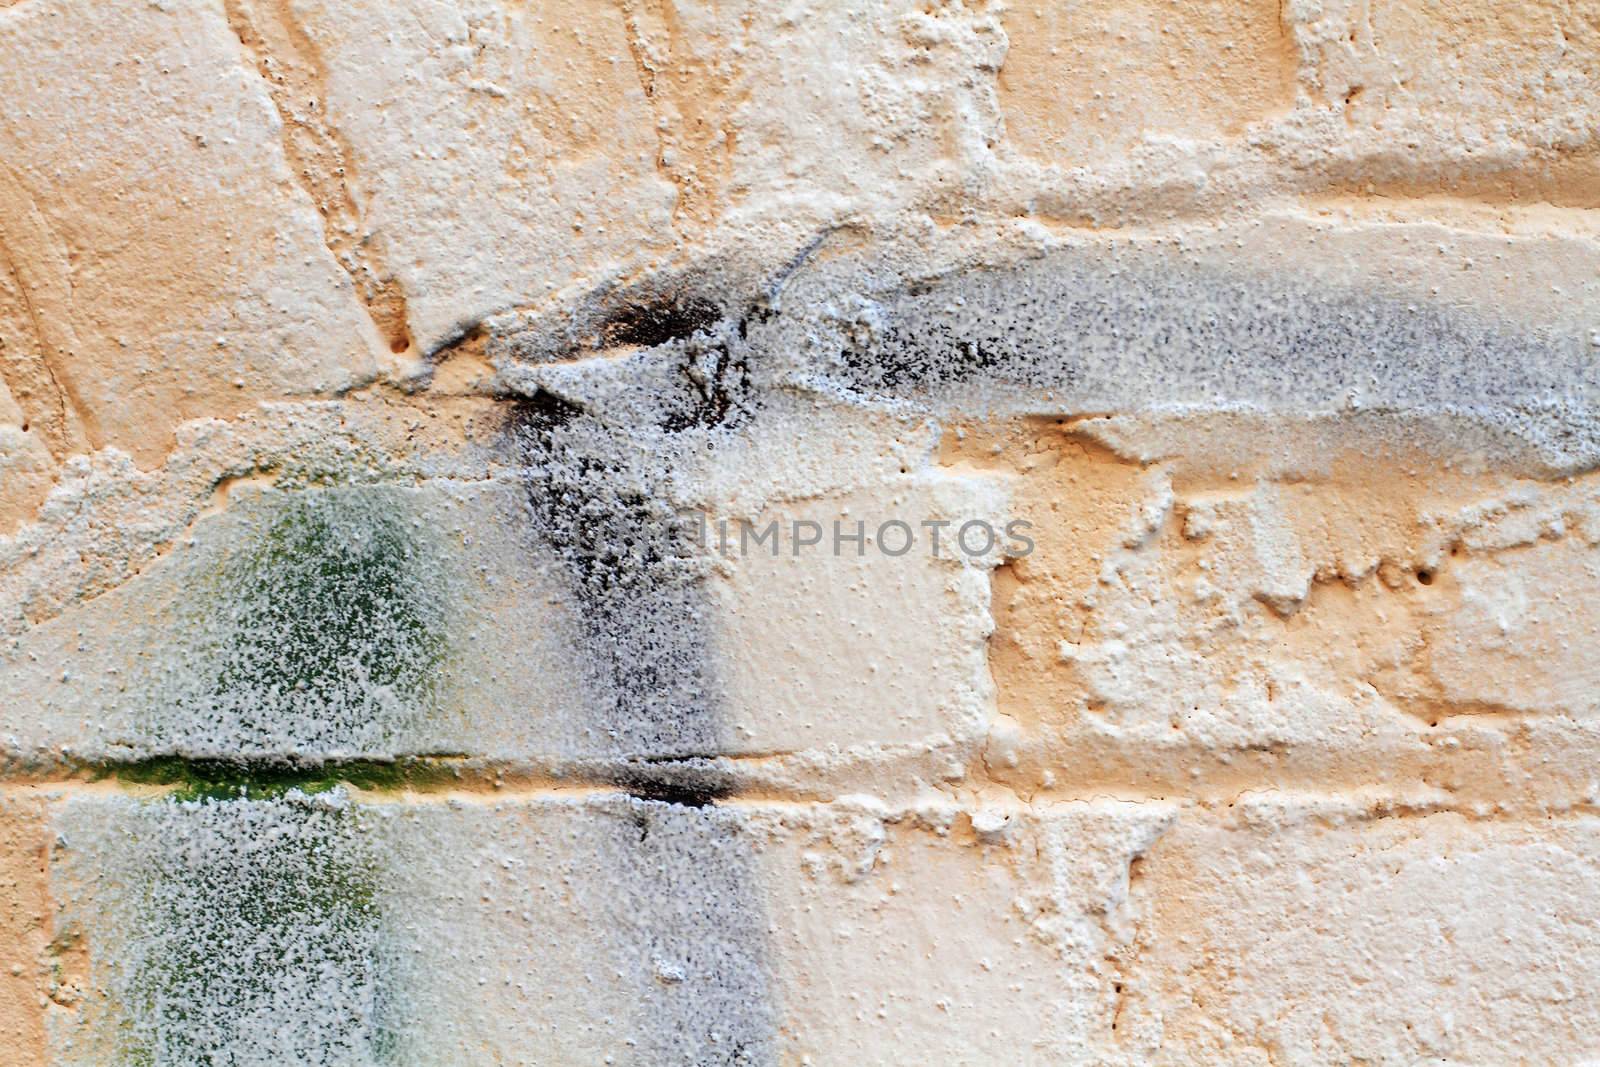 Rough texture of an orangish colored brick wall.